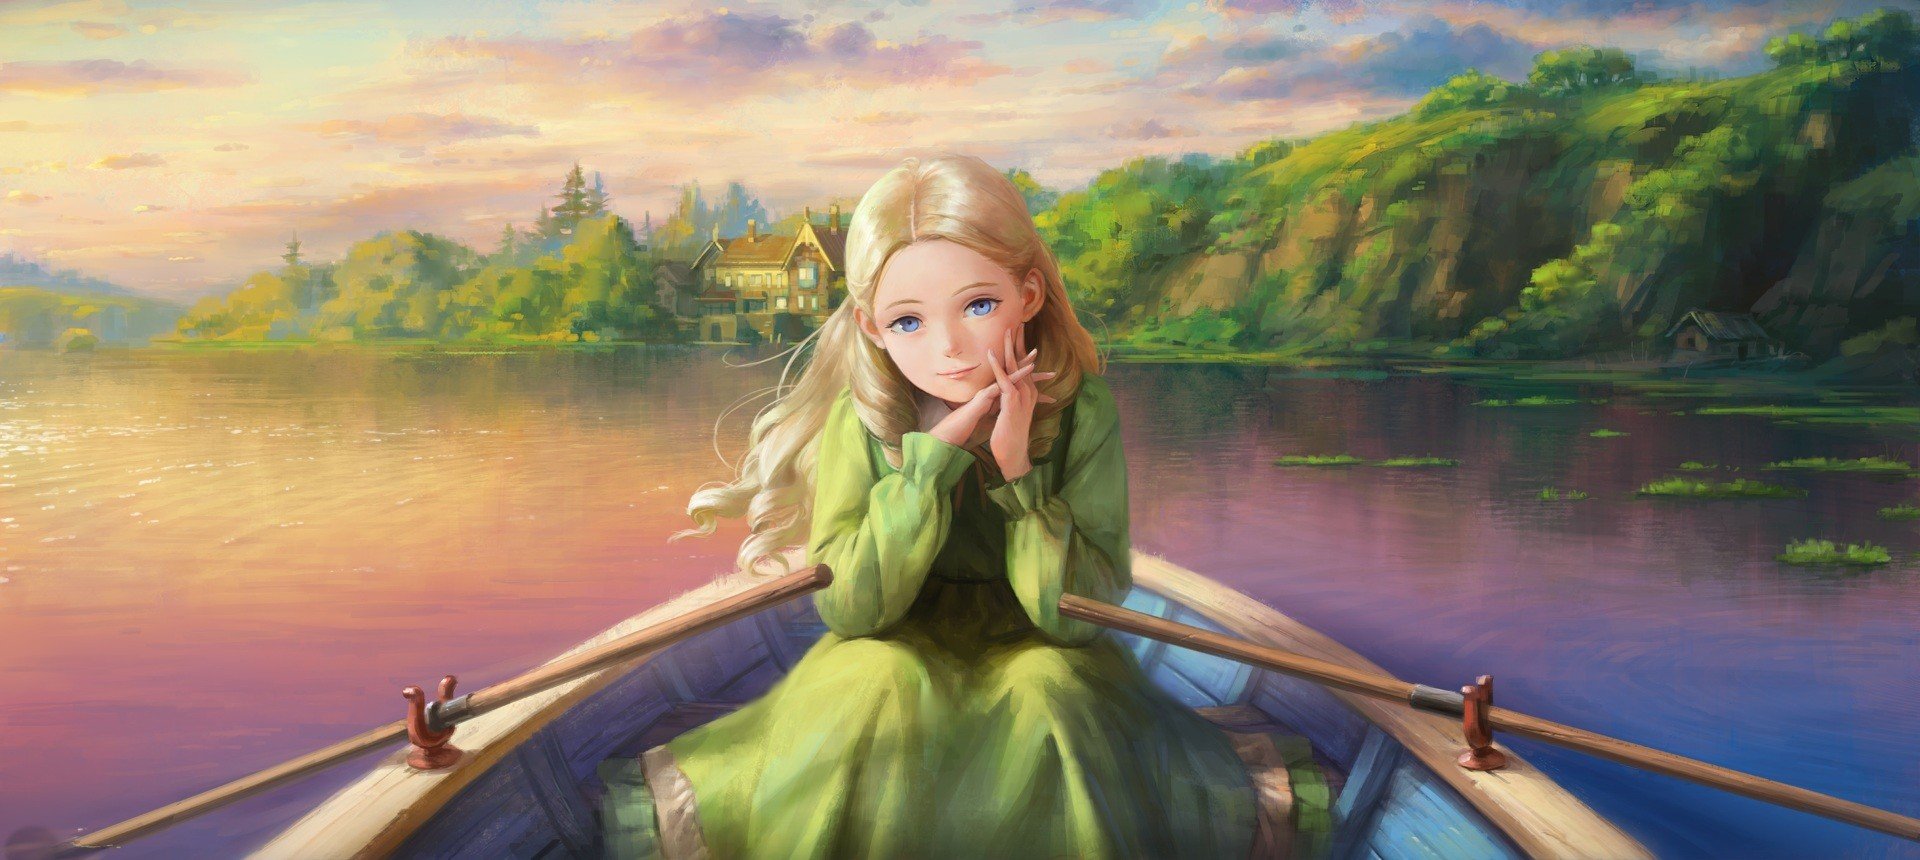 blue eyes, Boat, Original characters, Dress, When Marnie Was There Wallpaper